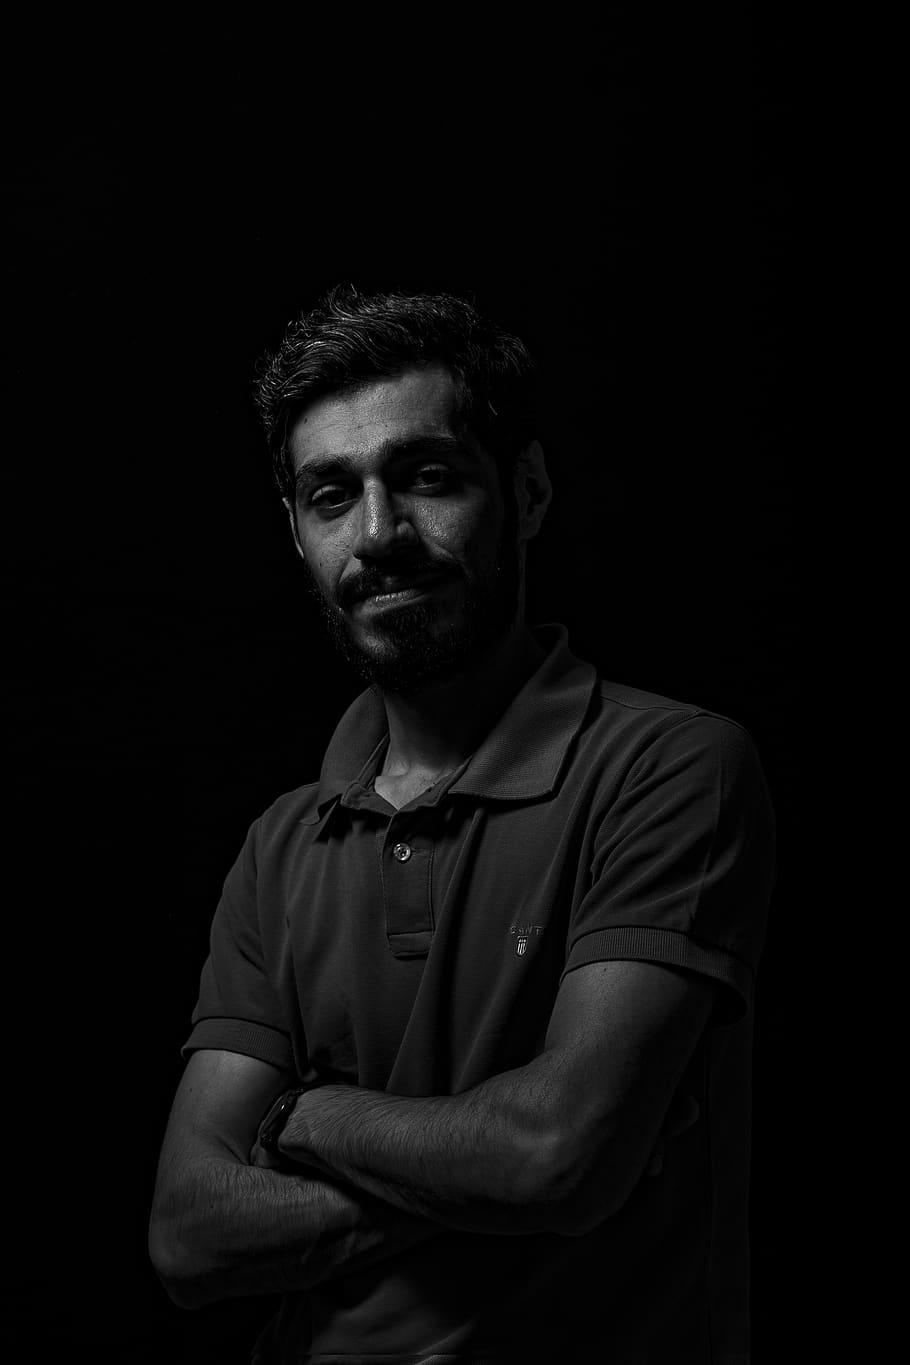 portrait, man, black and white, adult, person, beard, guy, one person, studio shot, black background